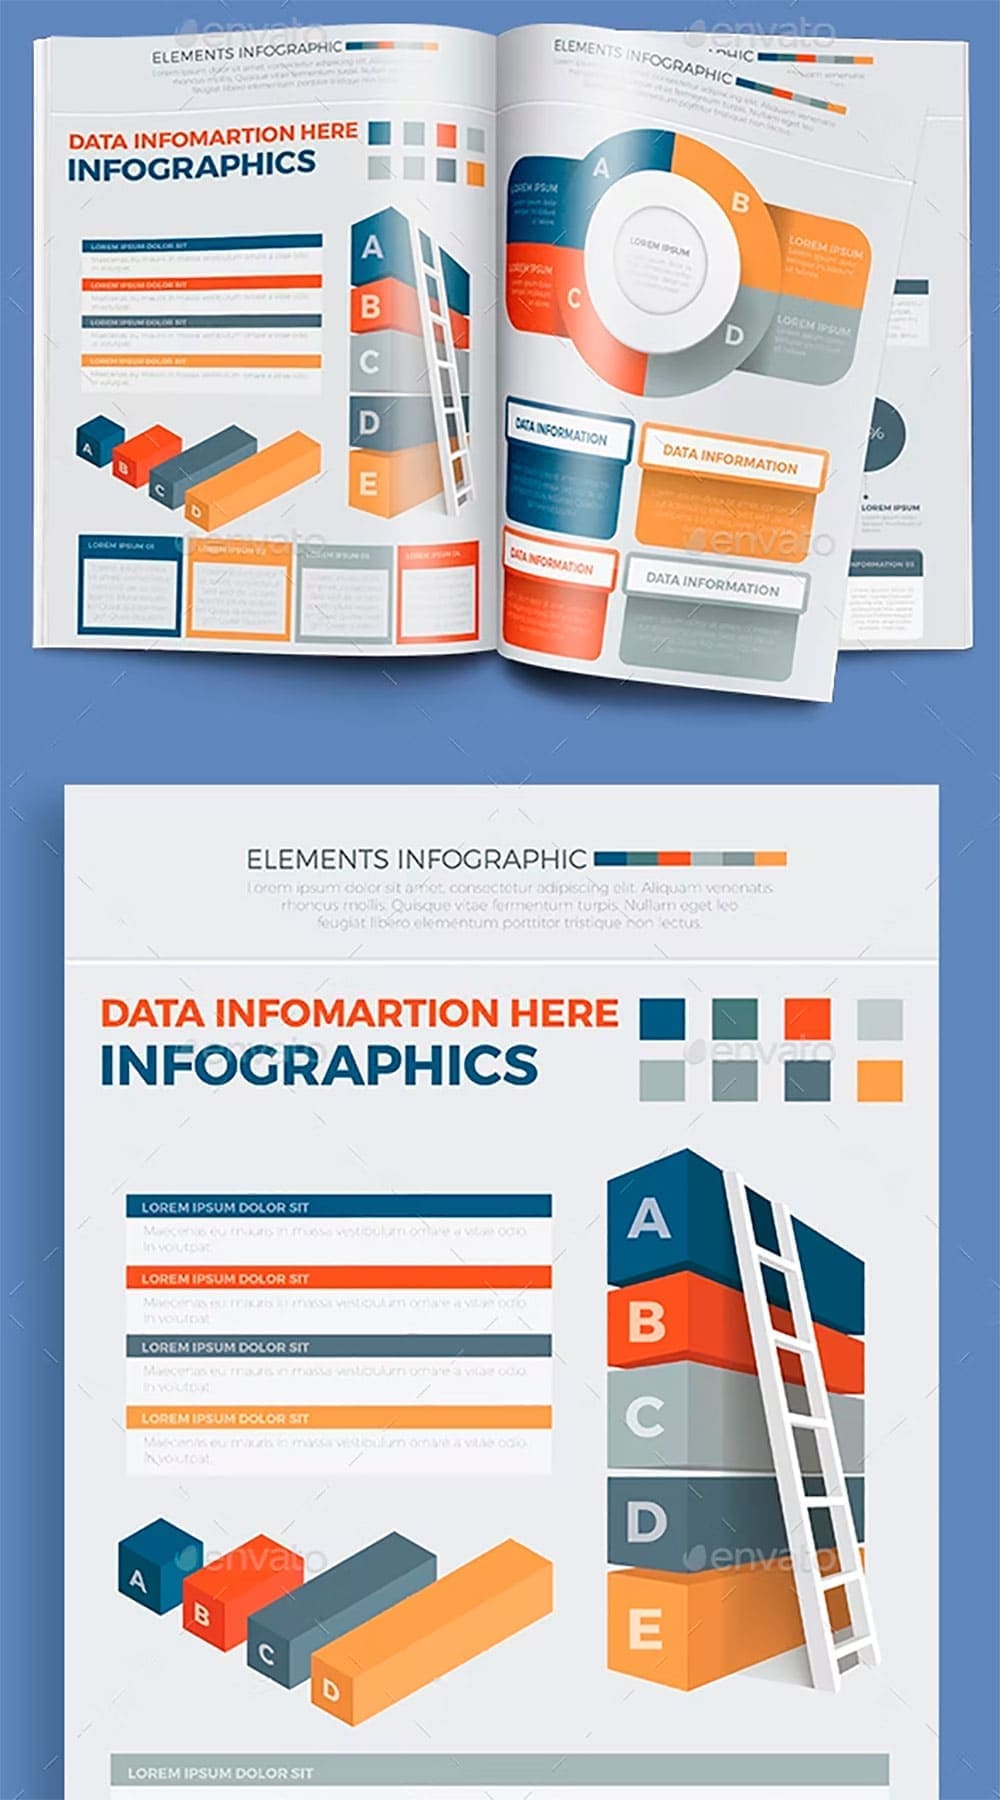 Infographic elements, picture for pinterest.